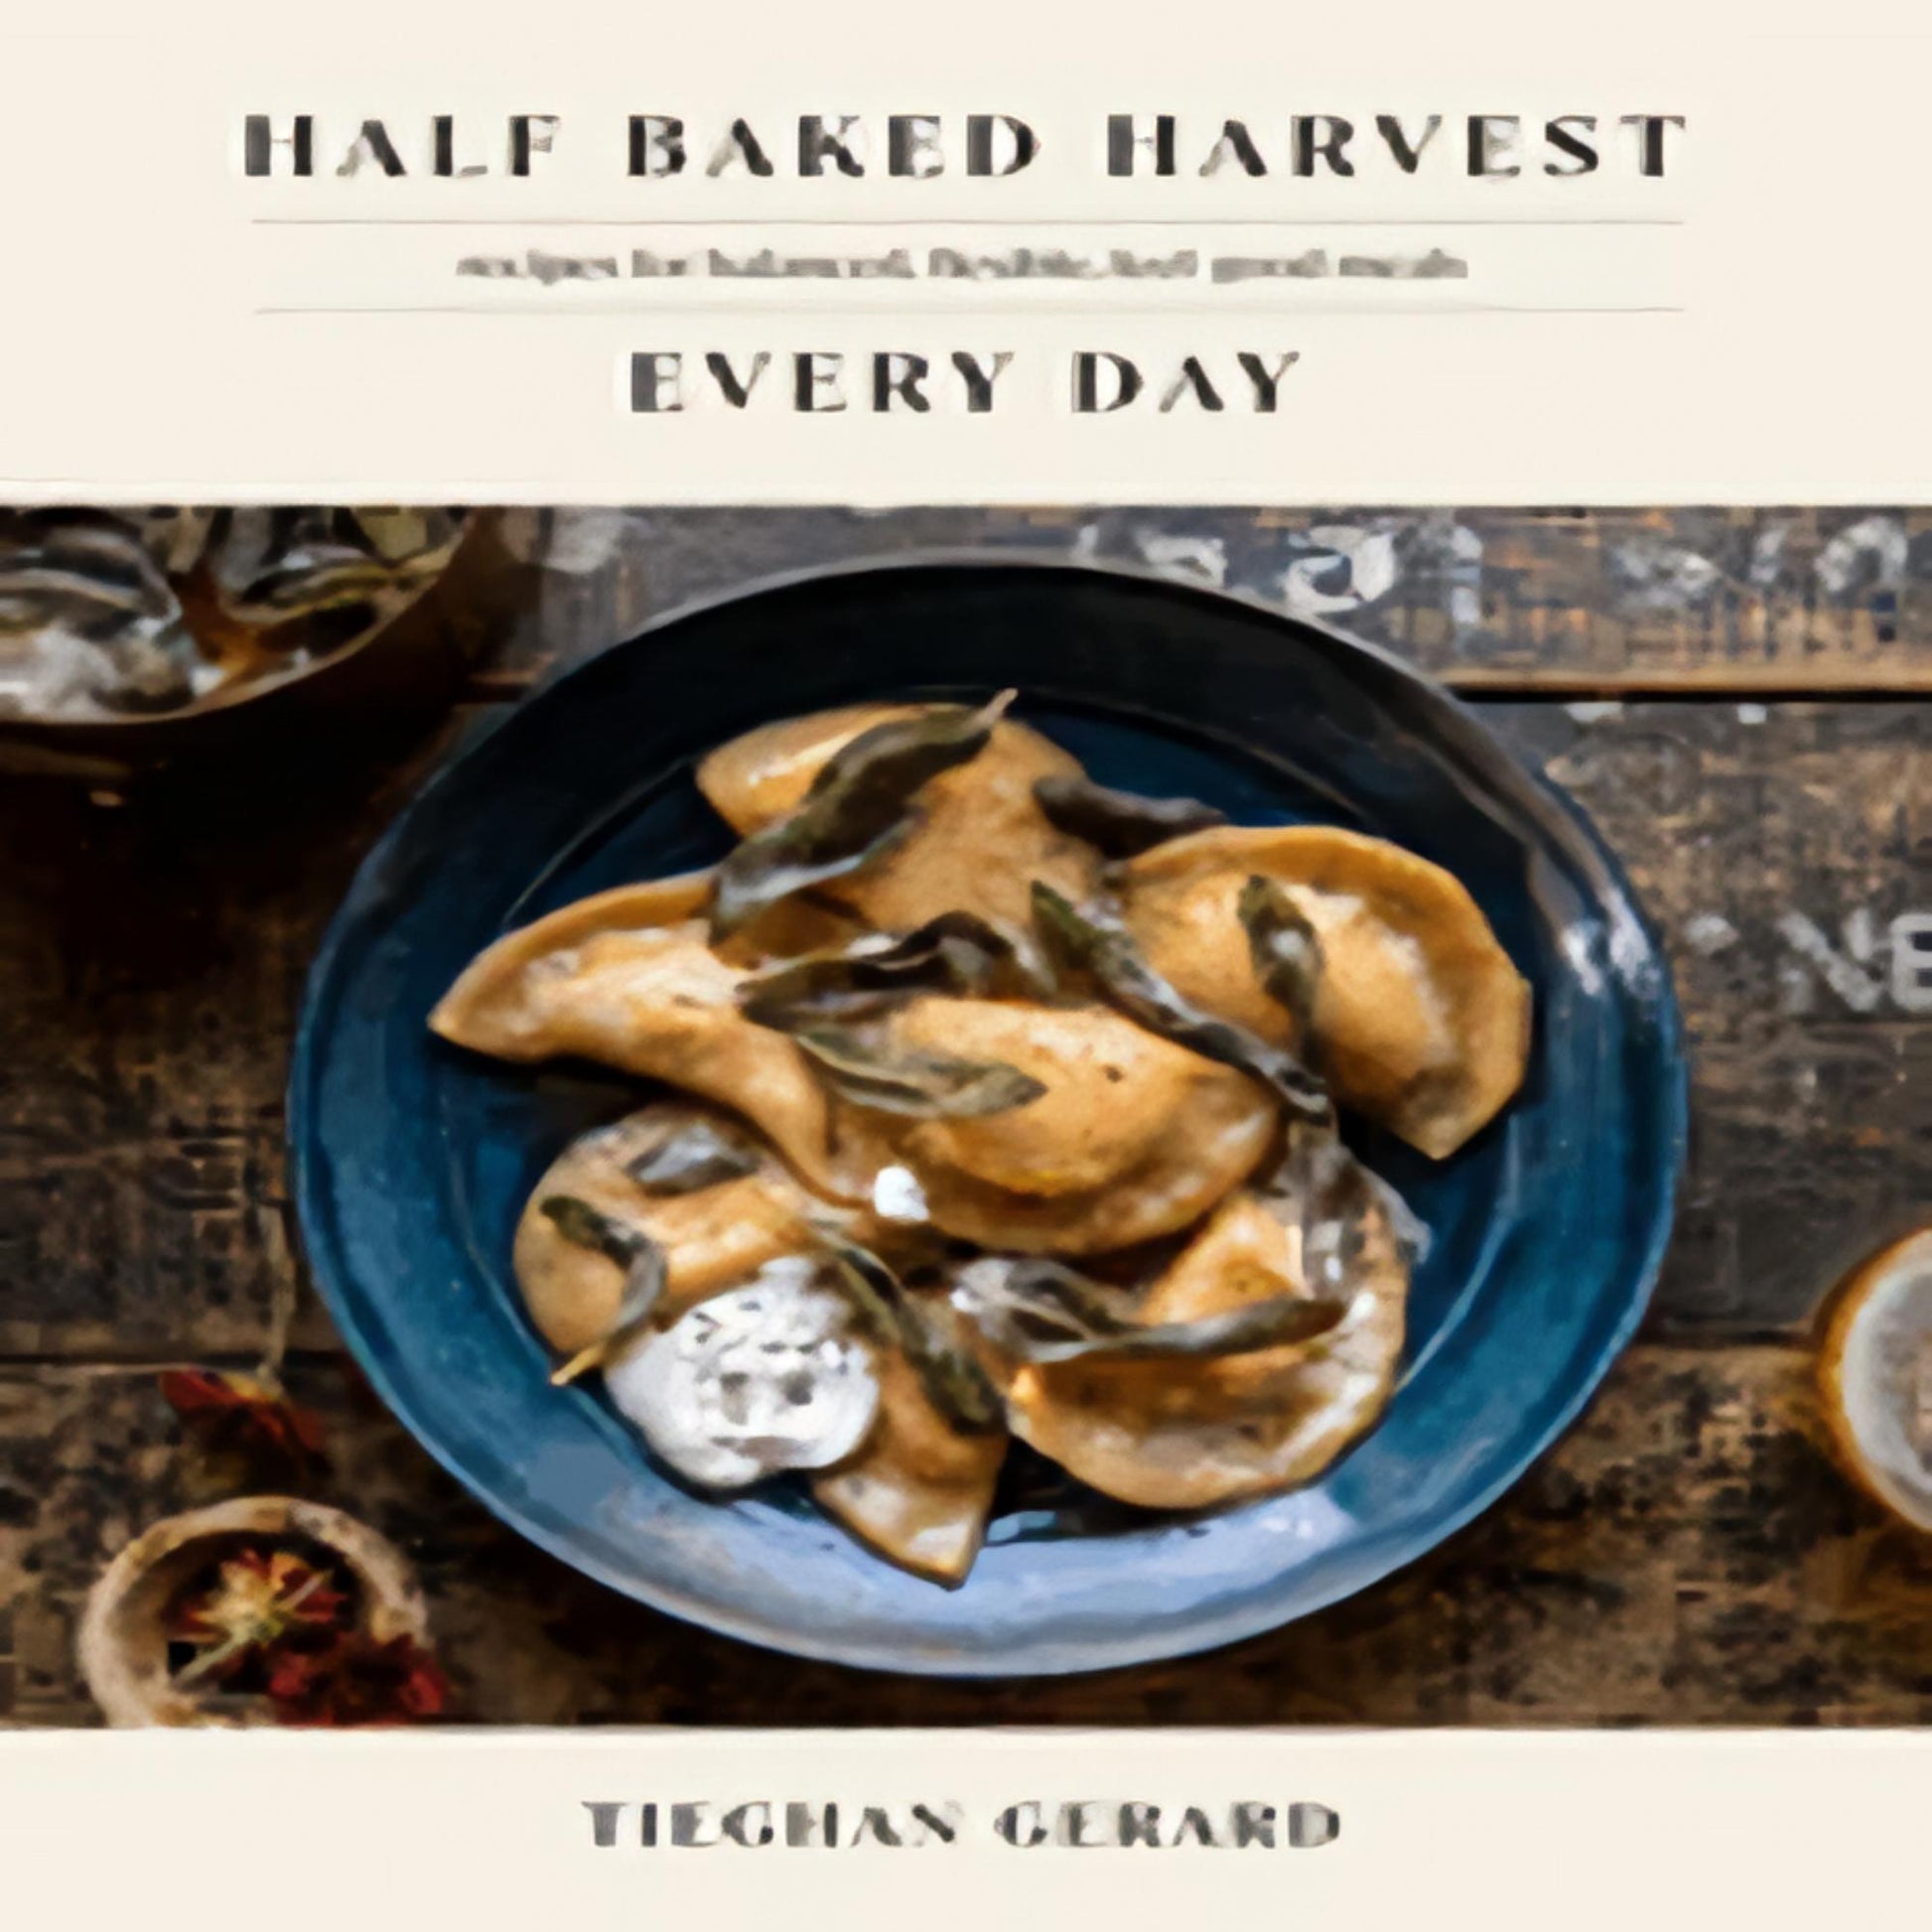 TEXTBOOK Half Baked Harvest Every Day: Recipes for Balanced, Flexible, Feel-Good Meals: A Cookbook106-022123-0593232550DPGBOOKSTORE.COM. Today's Bestsellers.